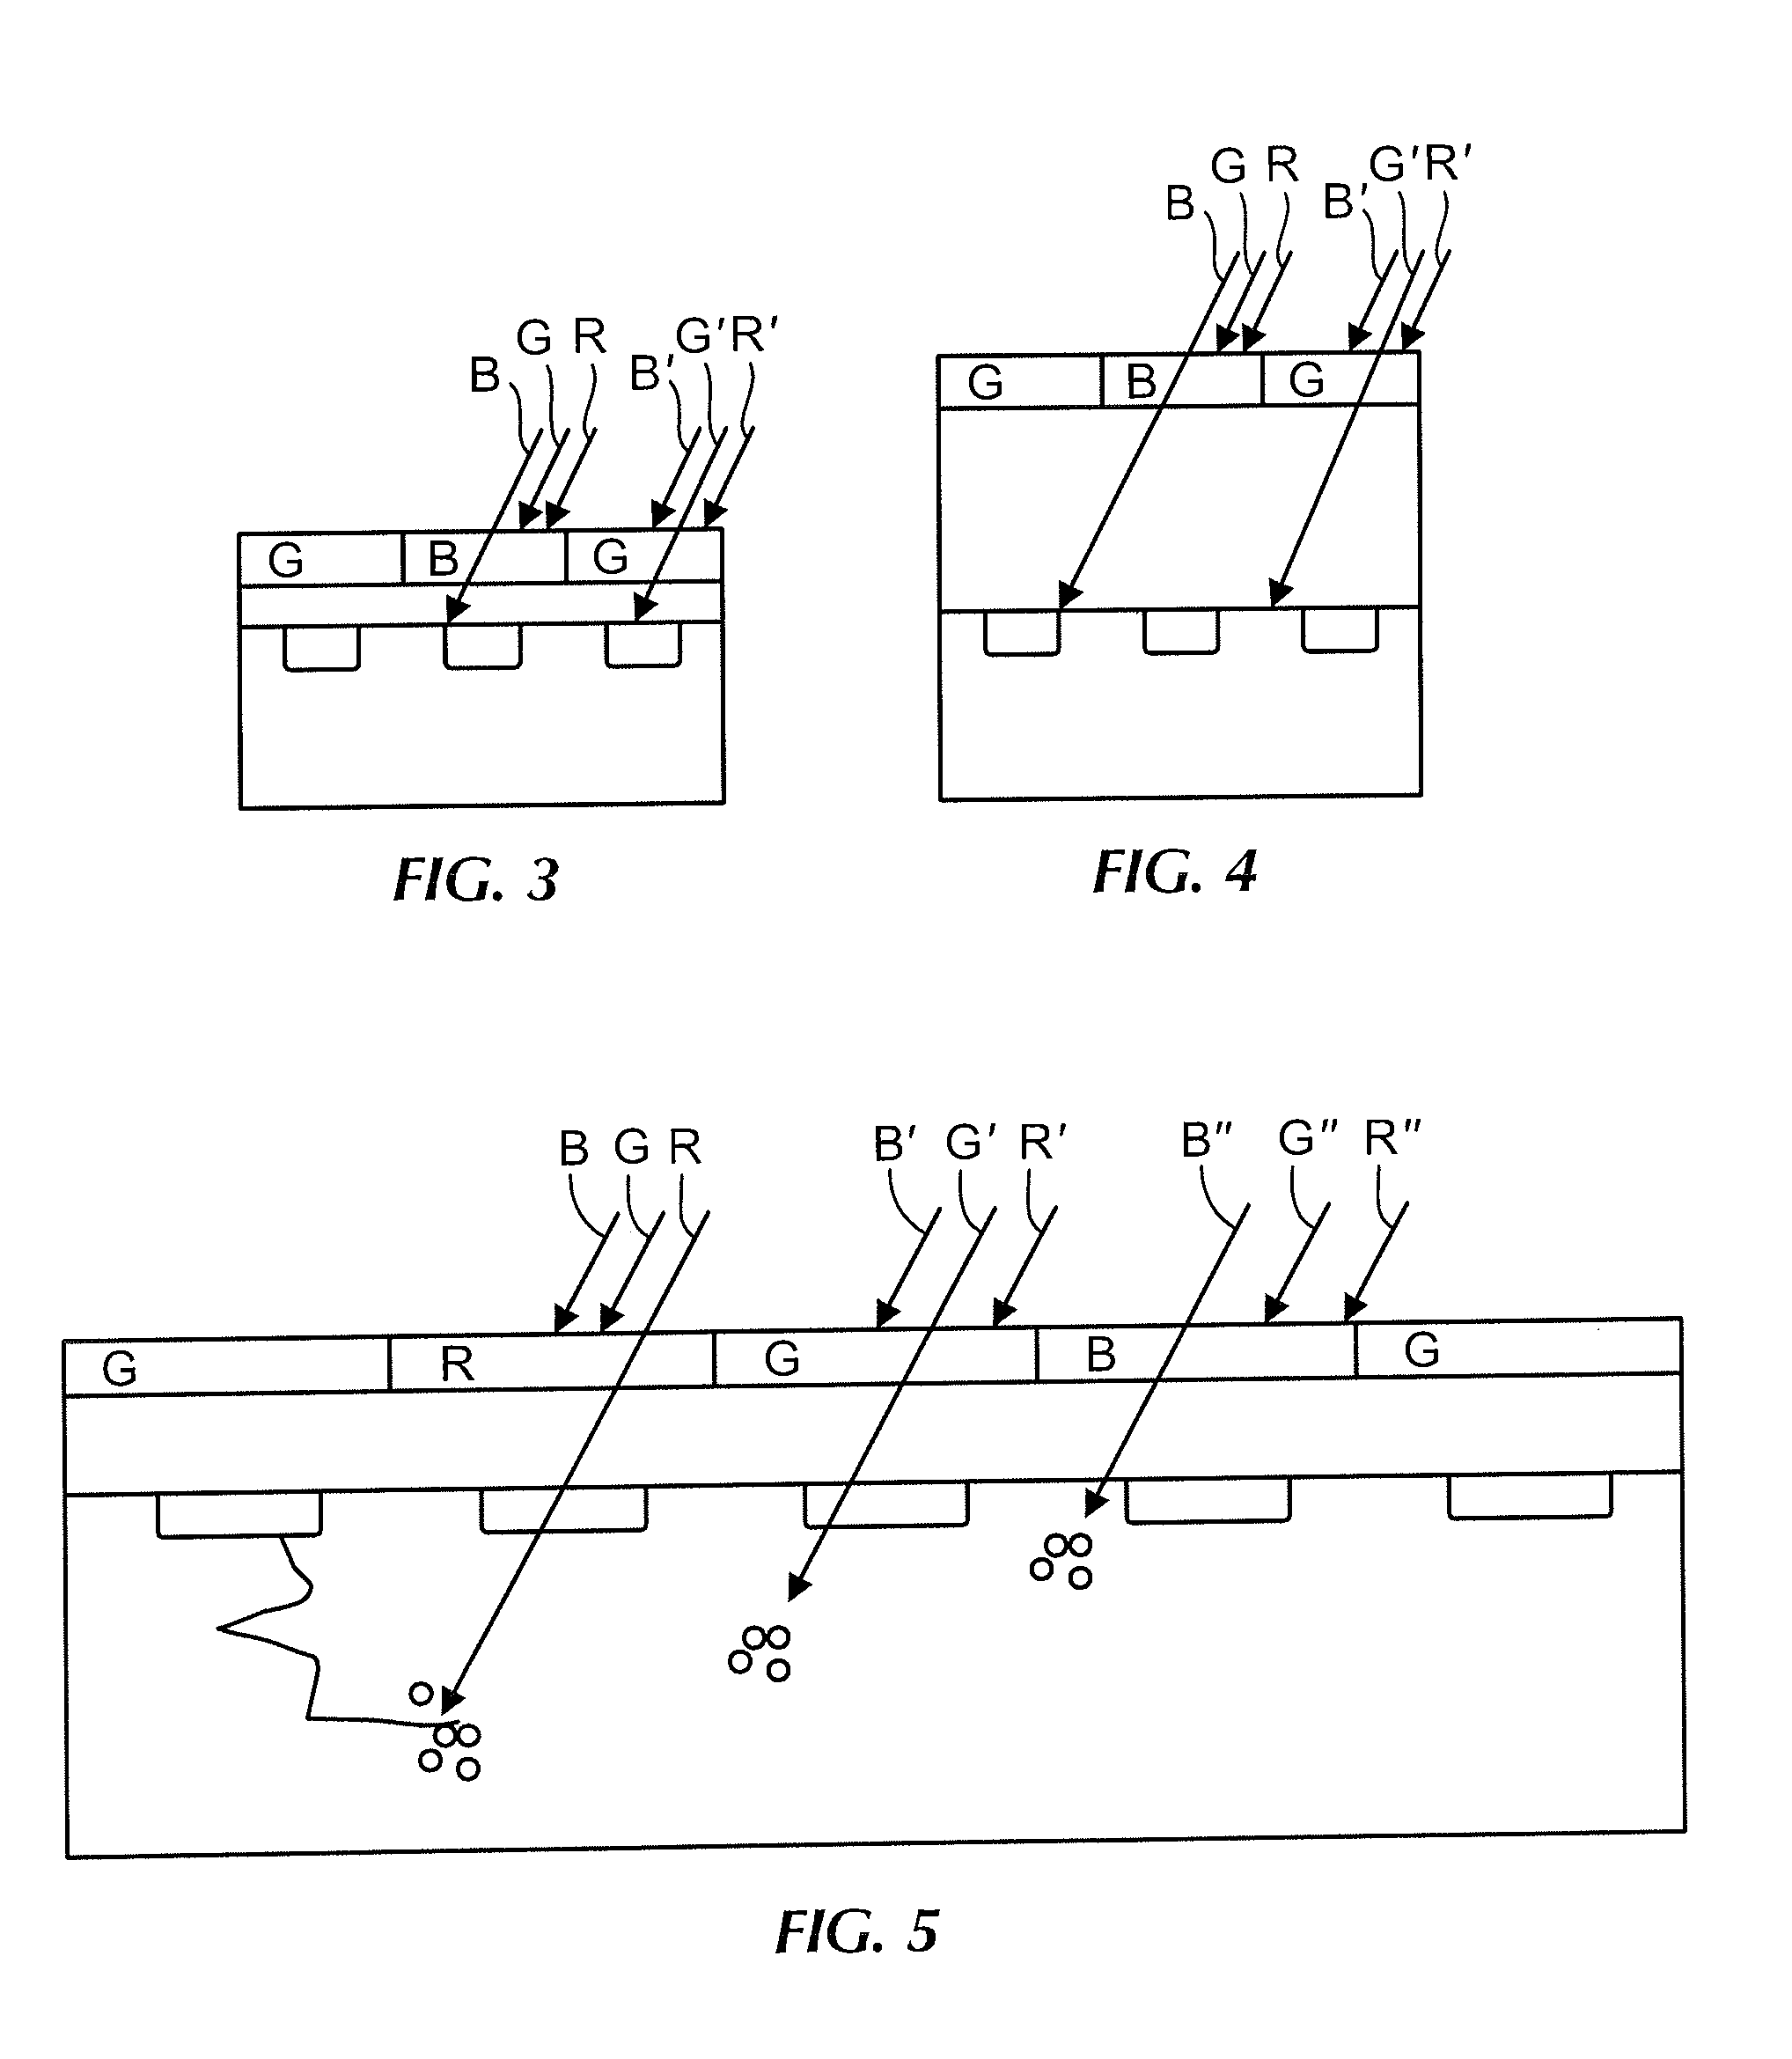 Method for Correcting Image Data From an Image Sensor Having Image Pixels and Non-Image Pixels, and Image Sensor Implementing Same